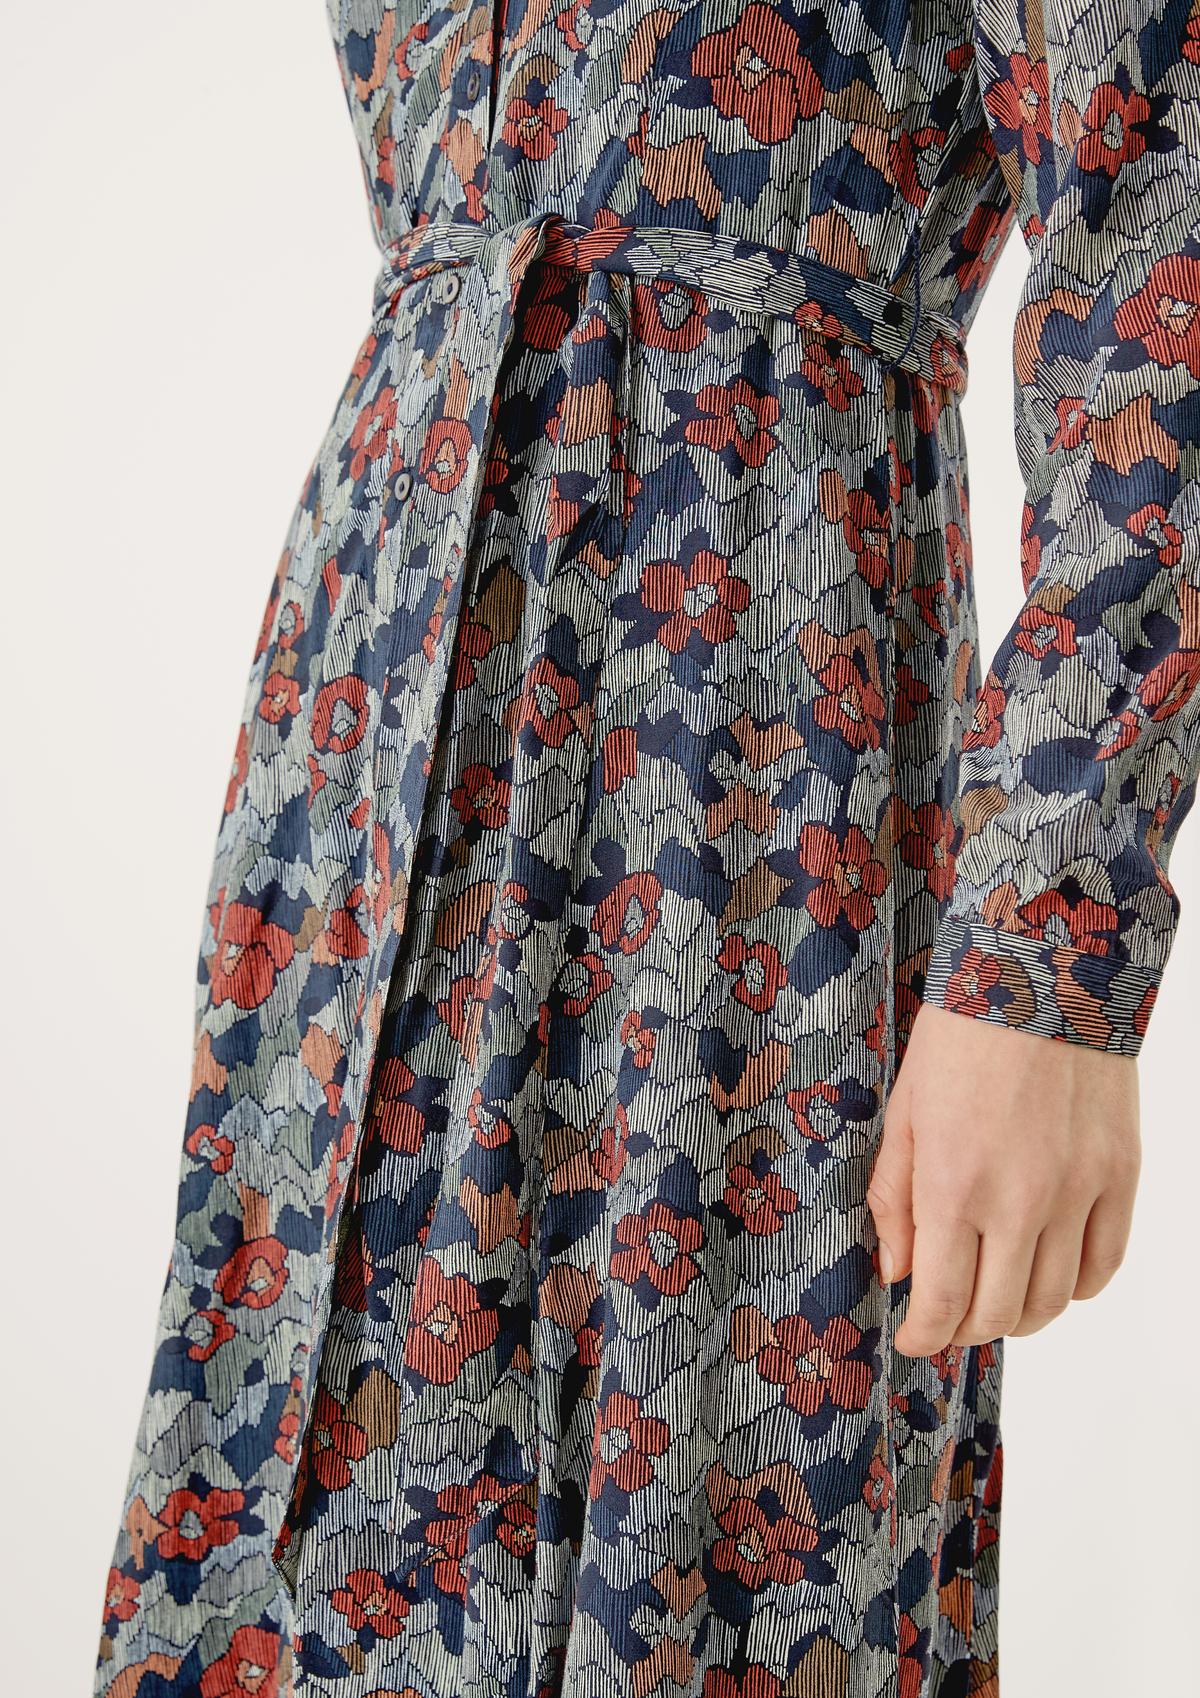 s.Oliver Shirt dress with a floral pattern